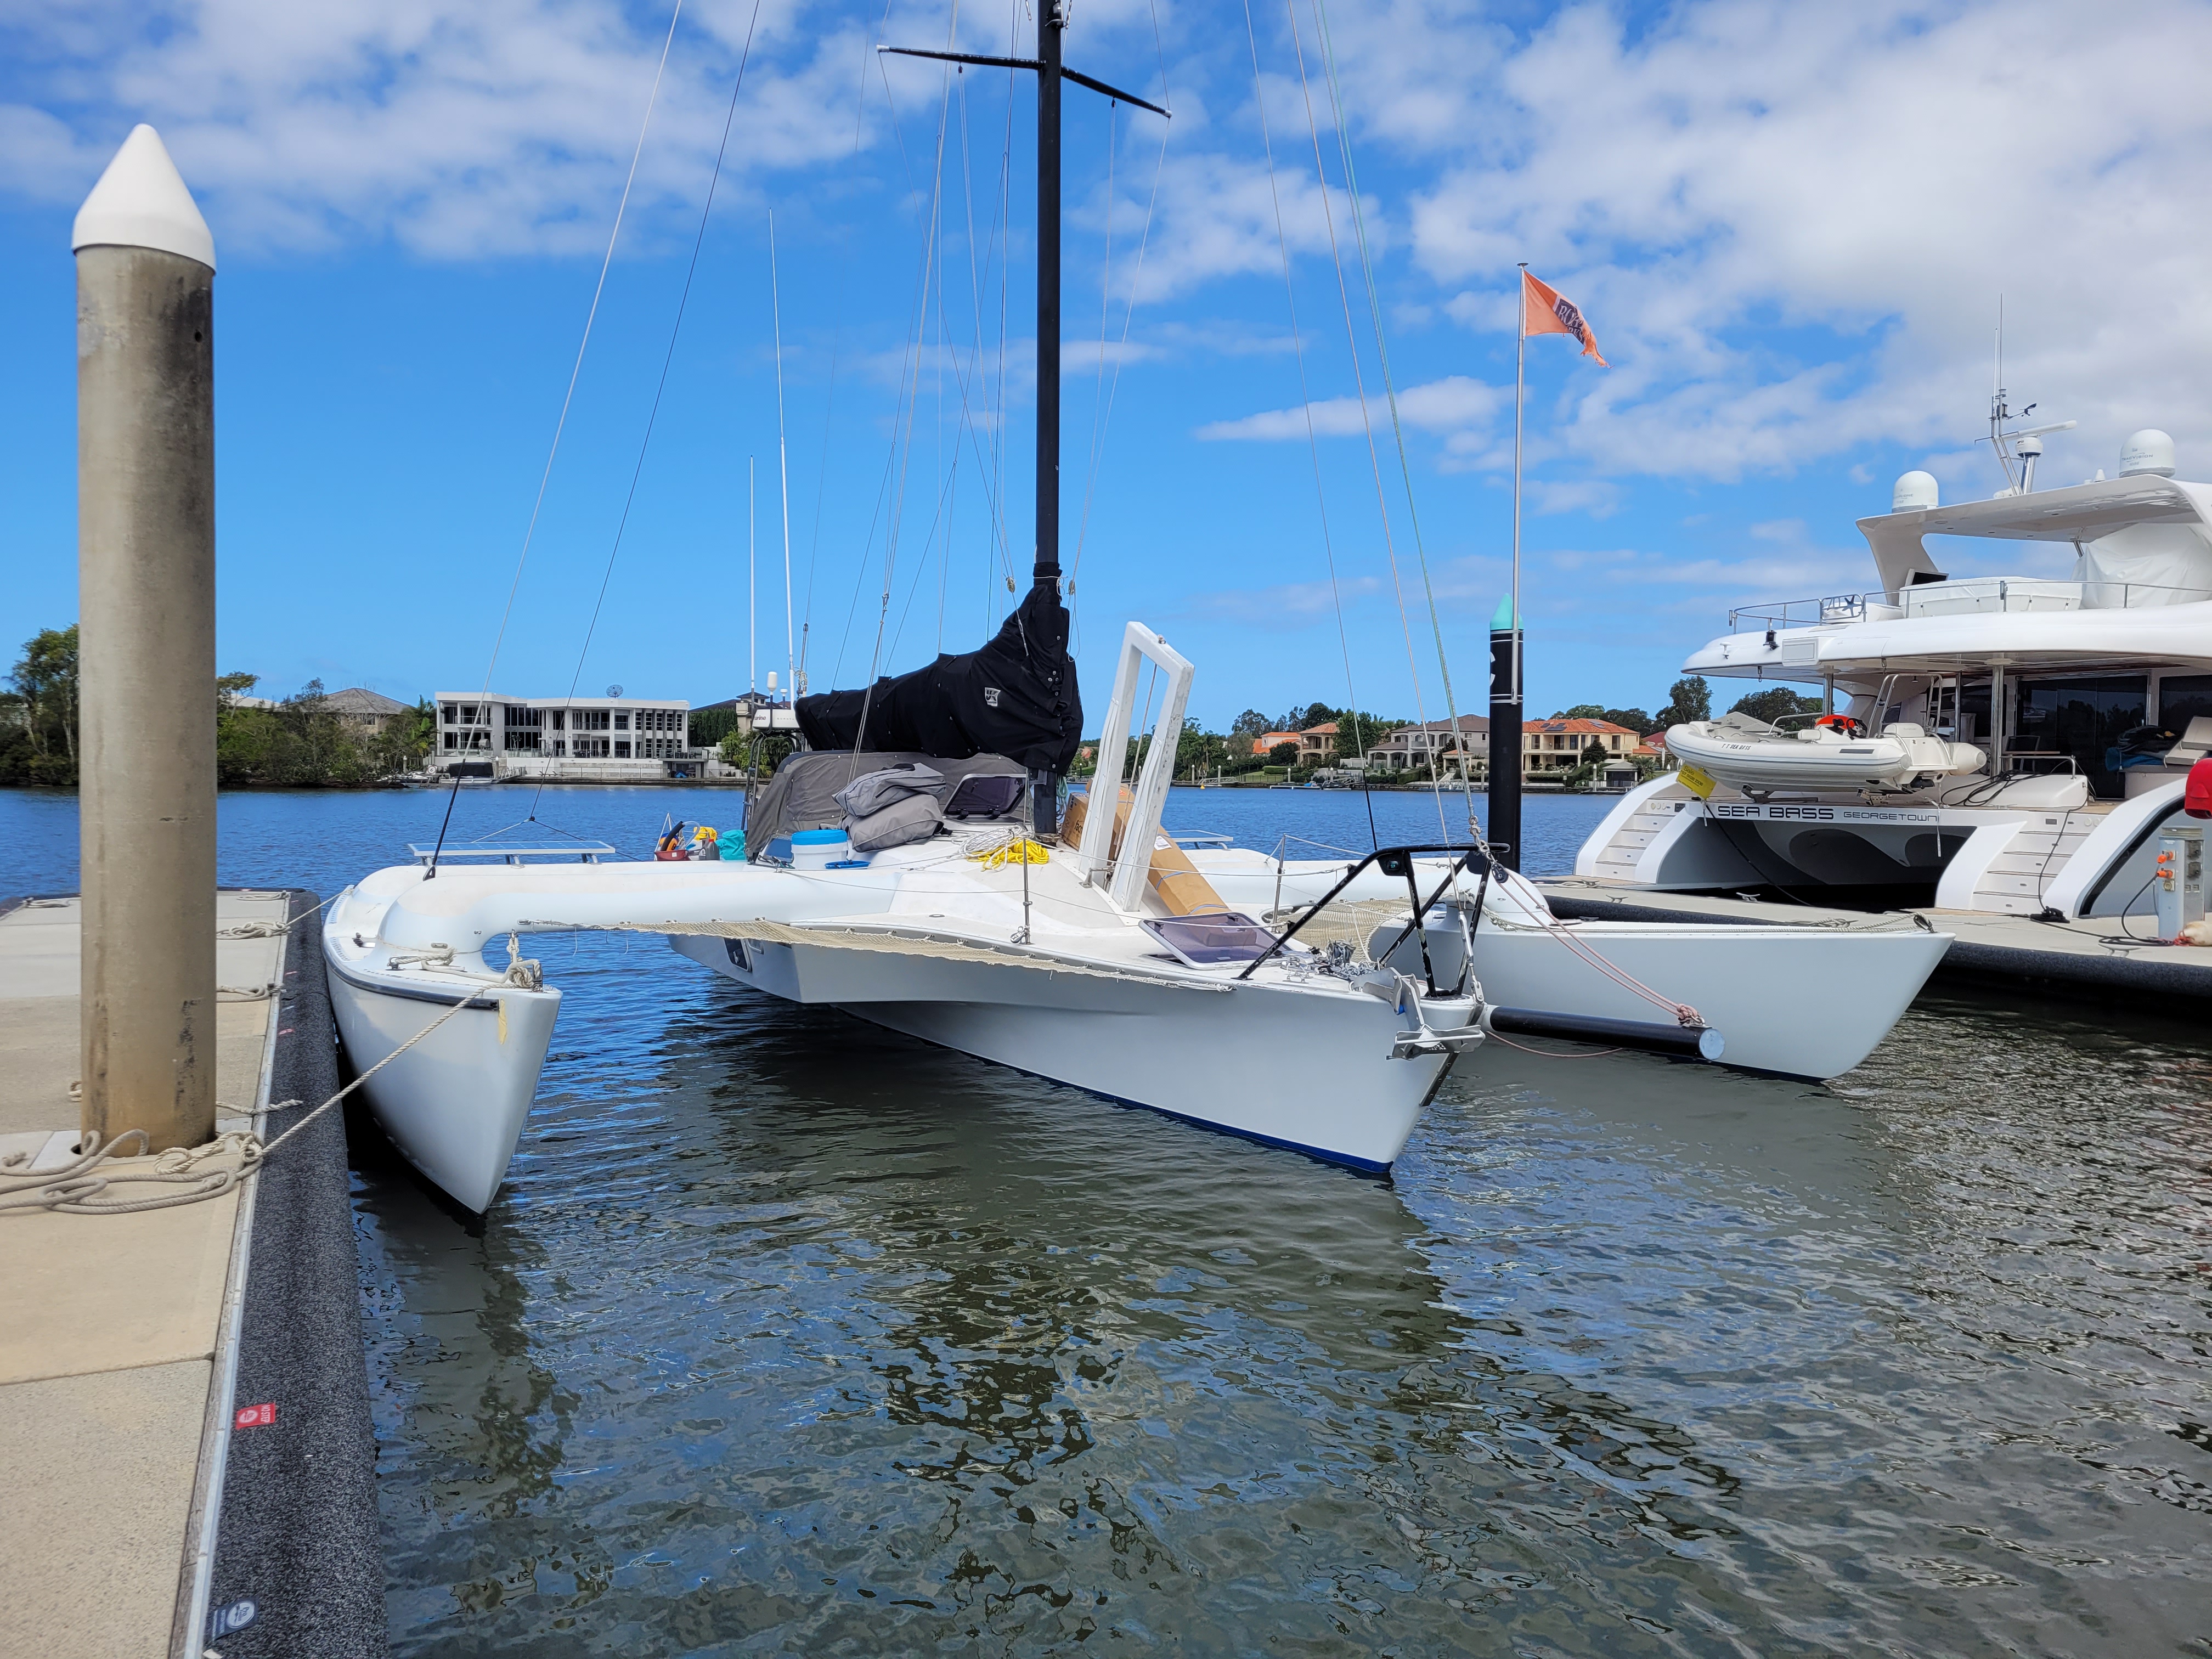 trimaran afloat, and on the haulout dock for leak inspection